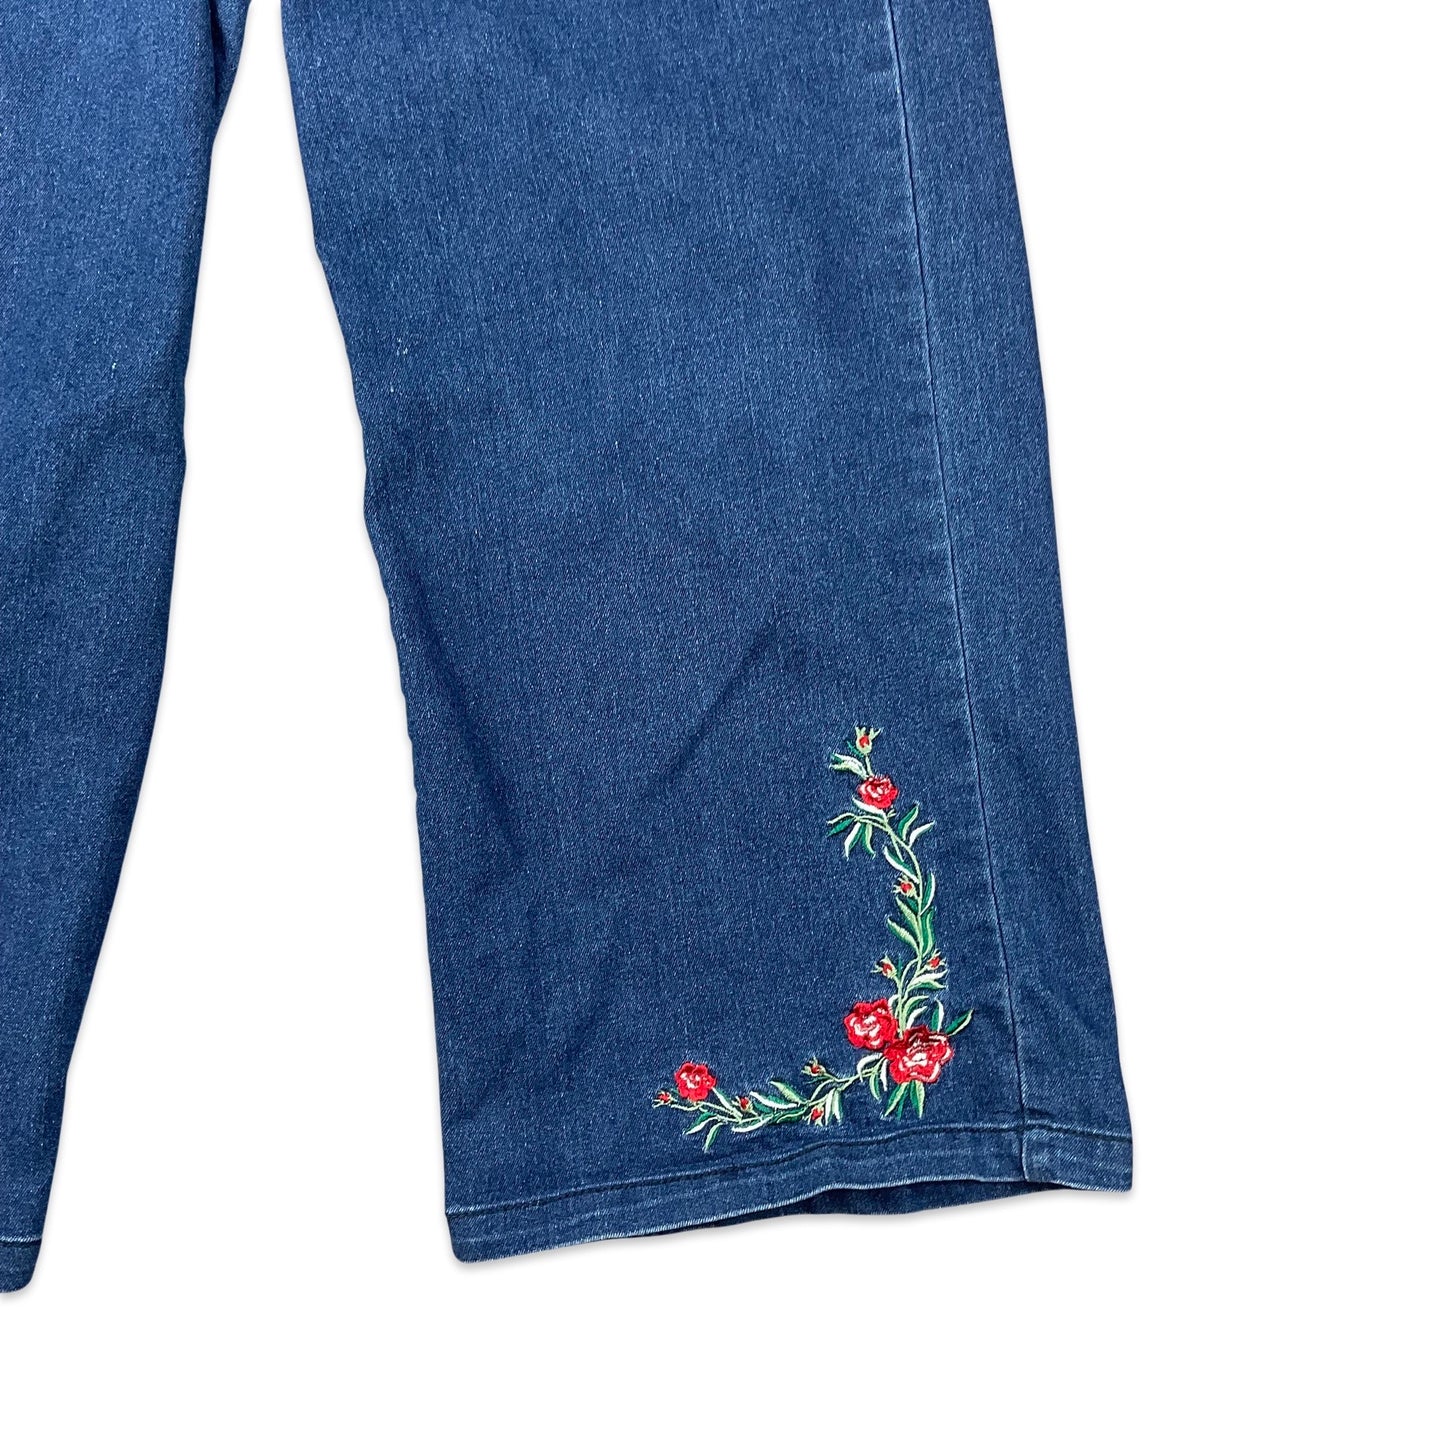 Floral Embroidered Blue Lace-up Wide Leg Jeans 4 6 8 10 12